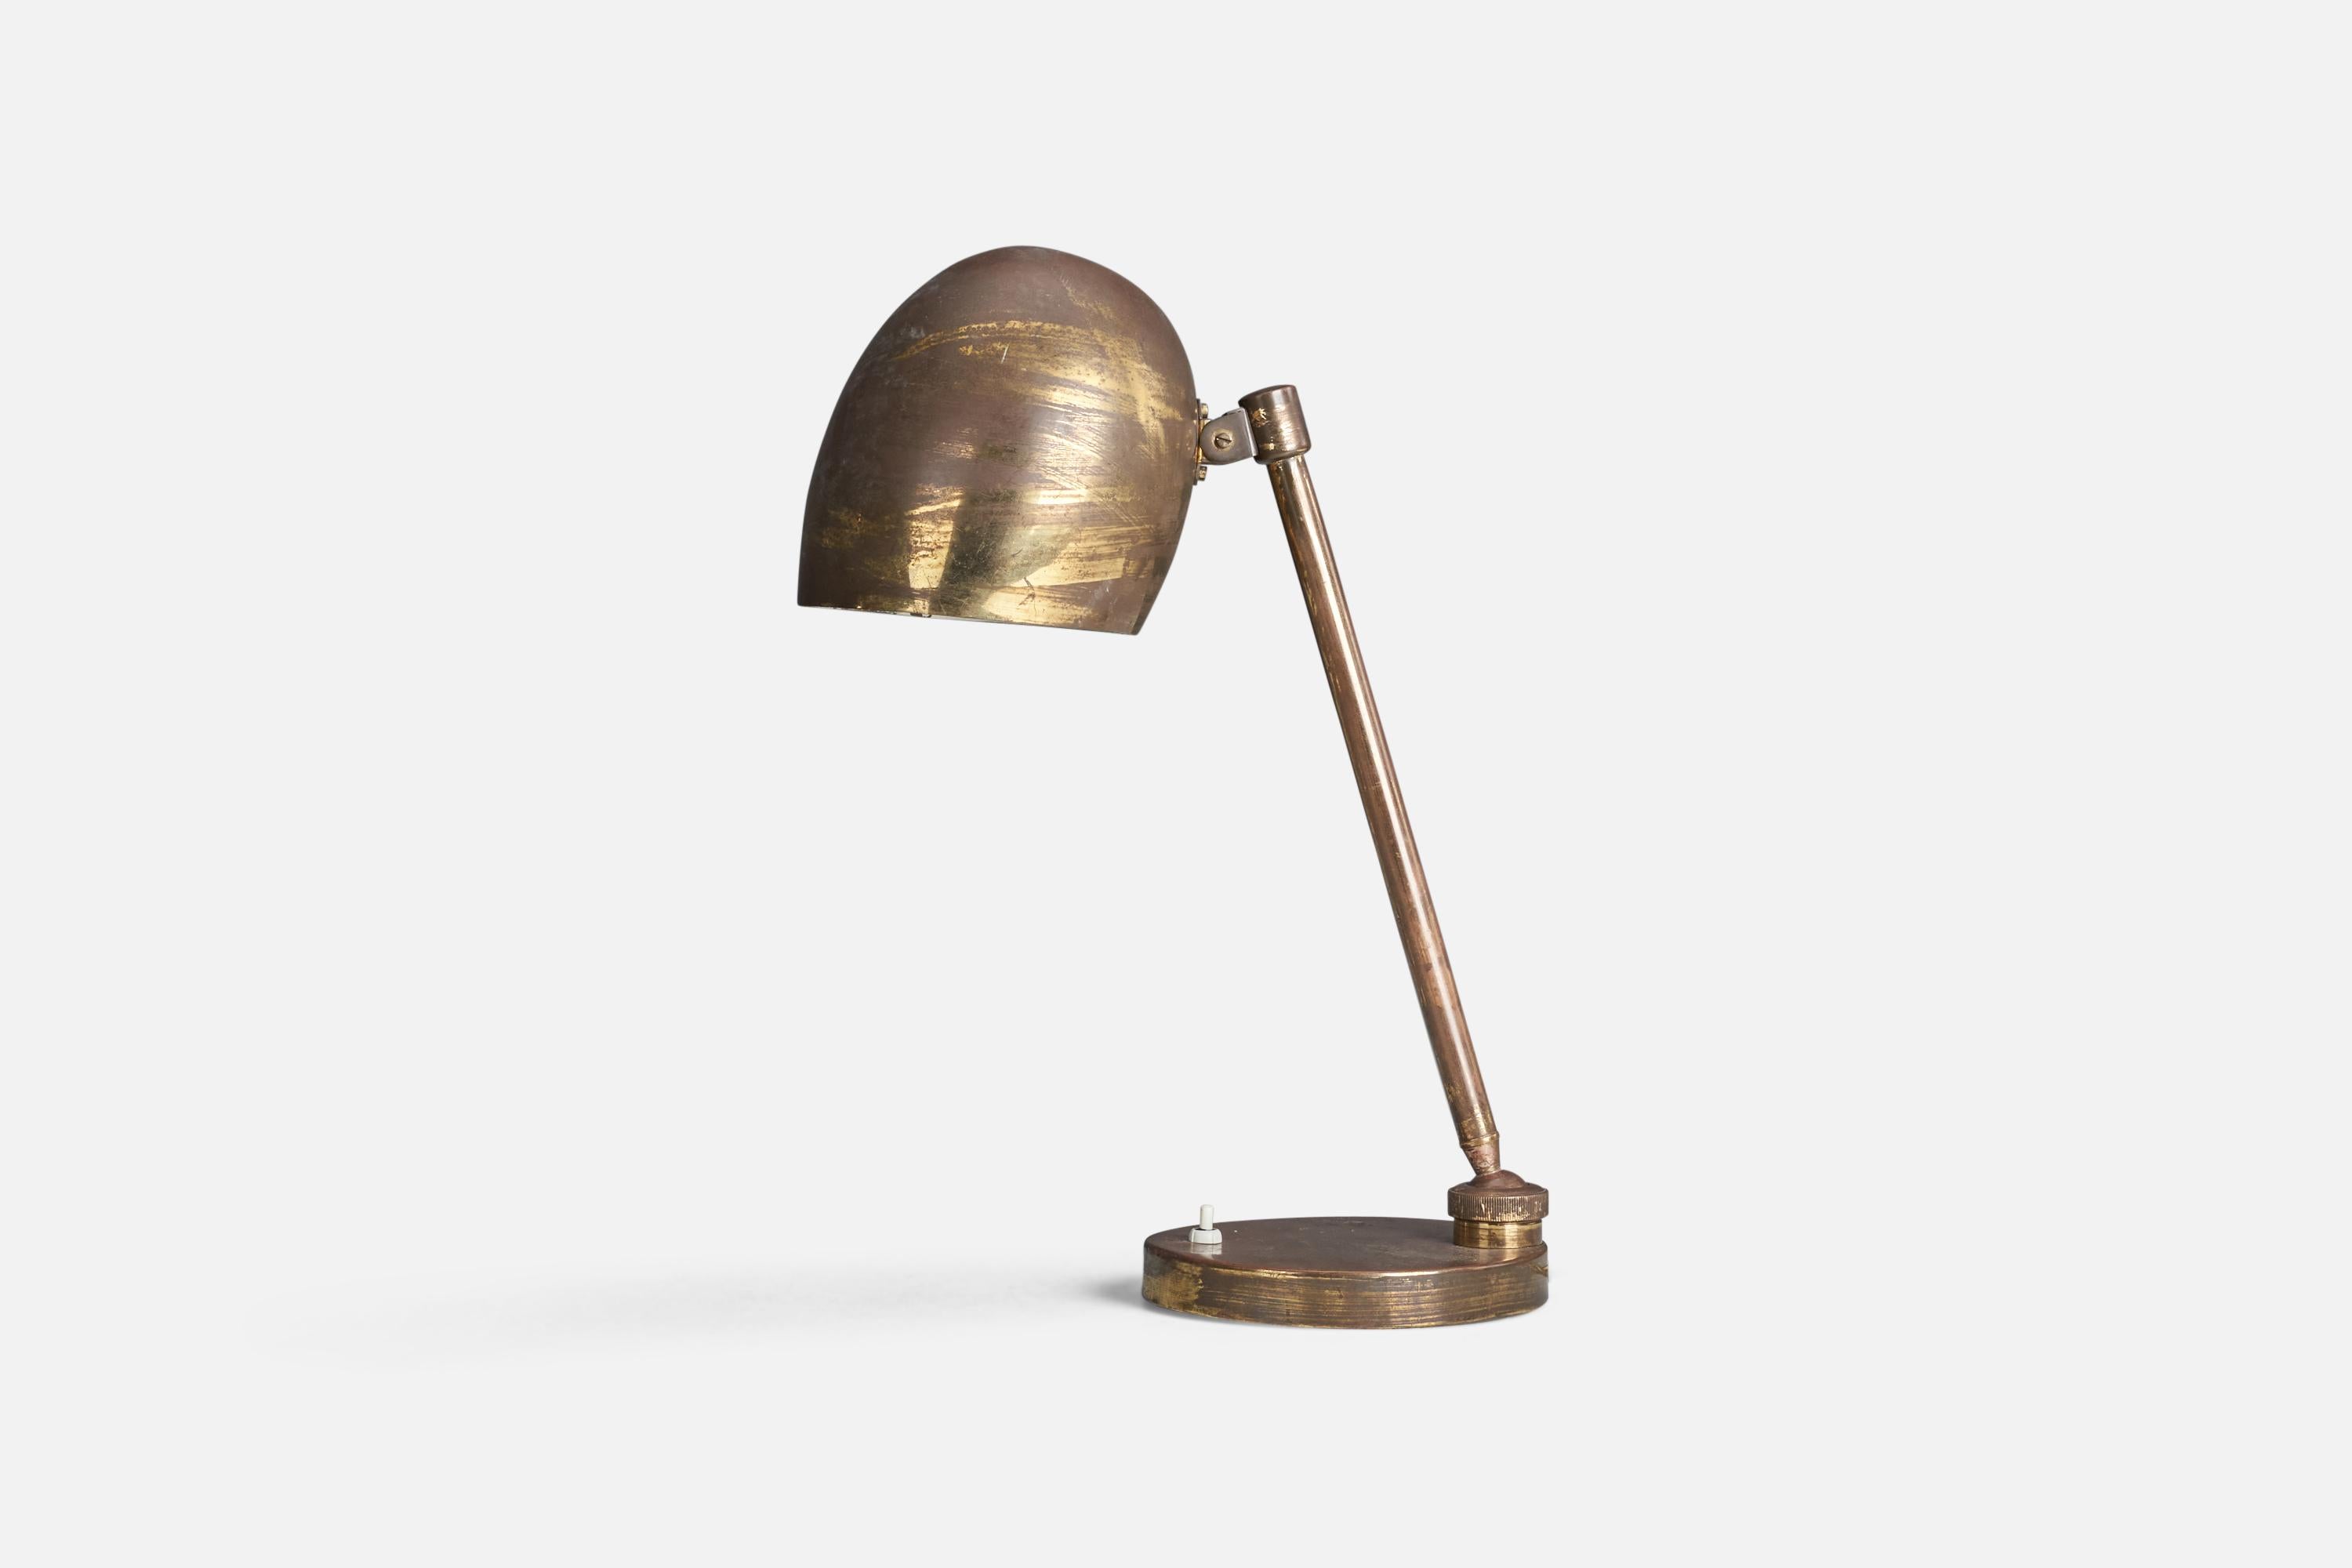 A brass table lamp designed and produced by an Italian Designer, Italy, 1940s.

Socket takes standard E-26 medium base bulb.

There is no maximum wattage stated on the fixture.